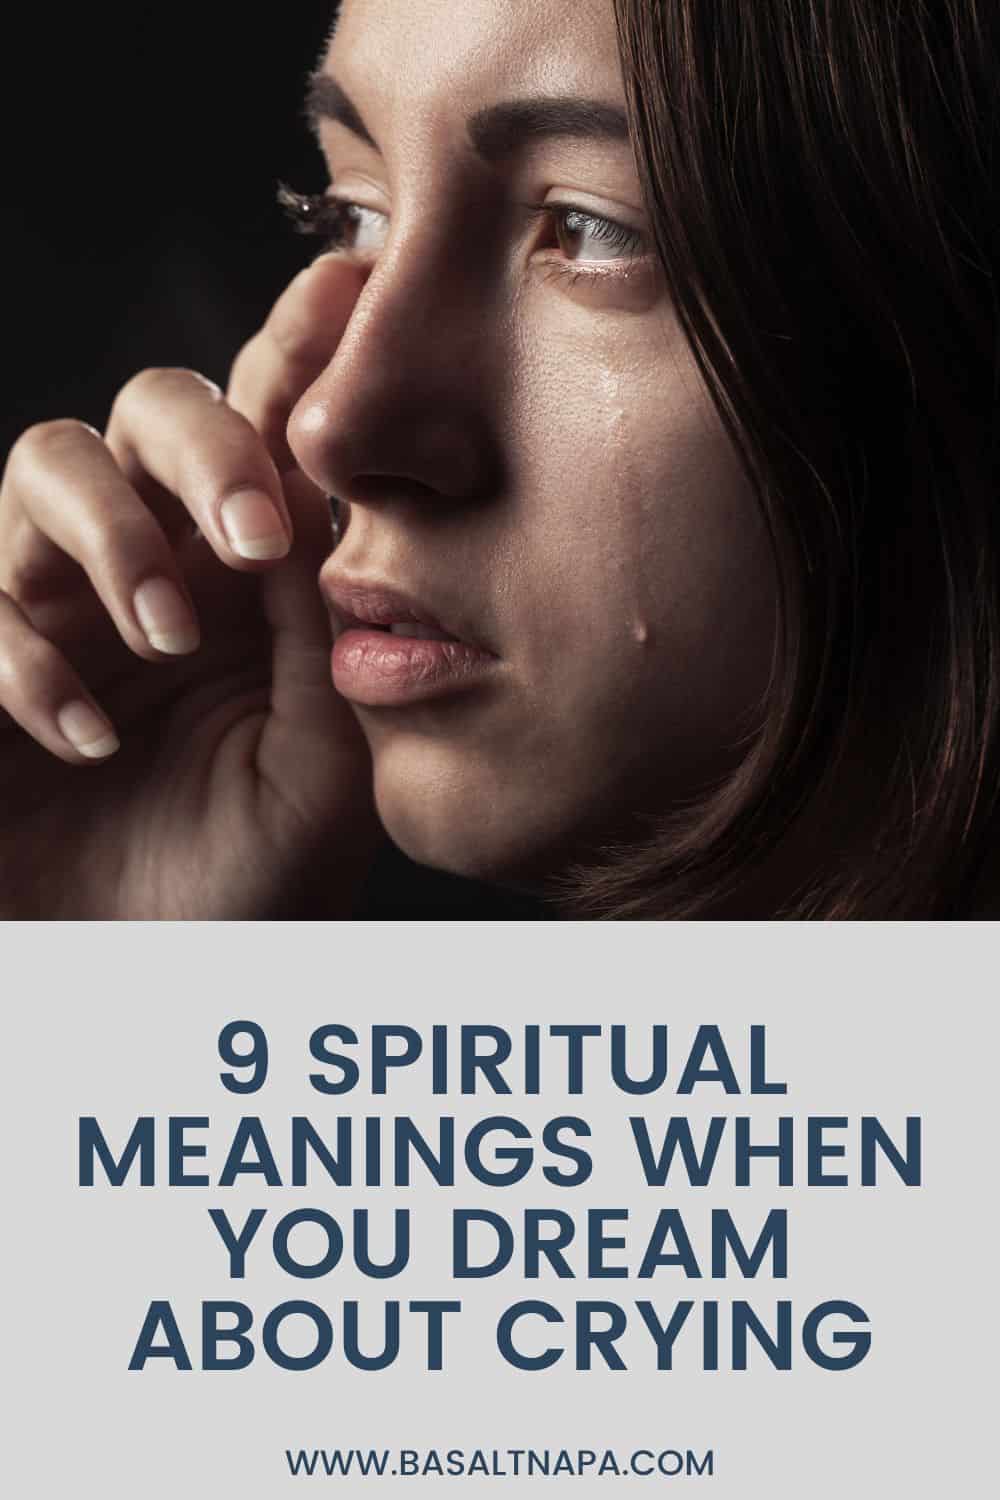 Spiritual Meanings When You Dream About Crying